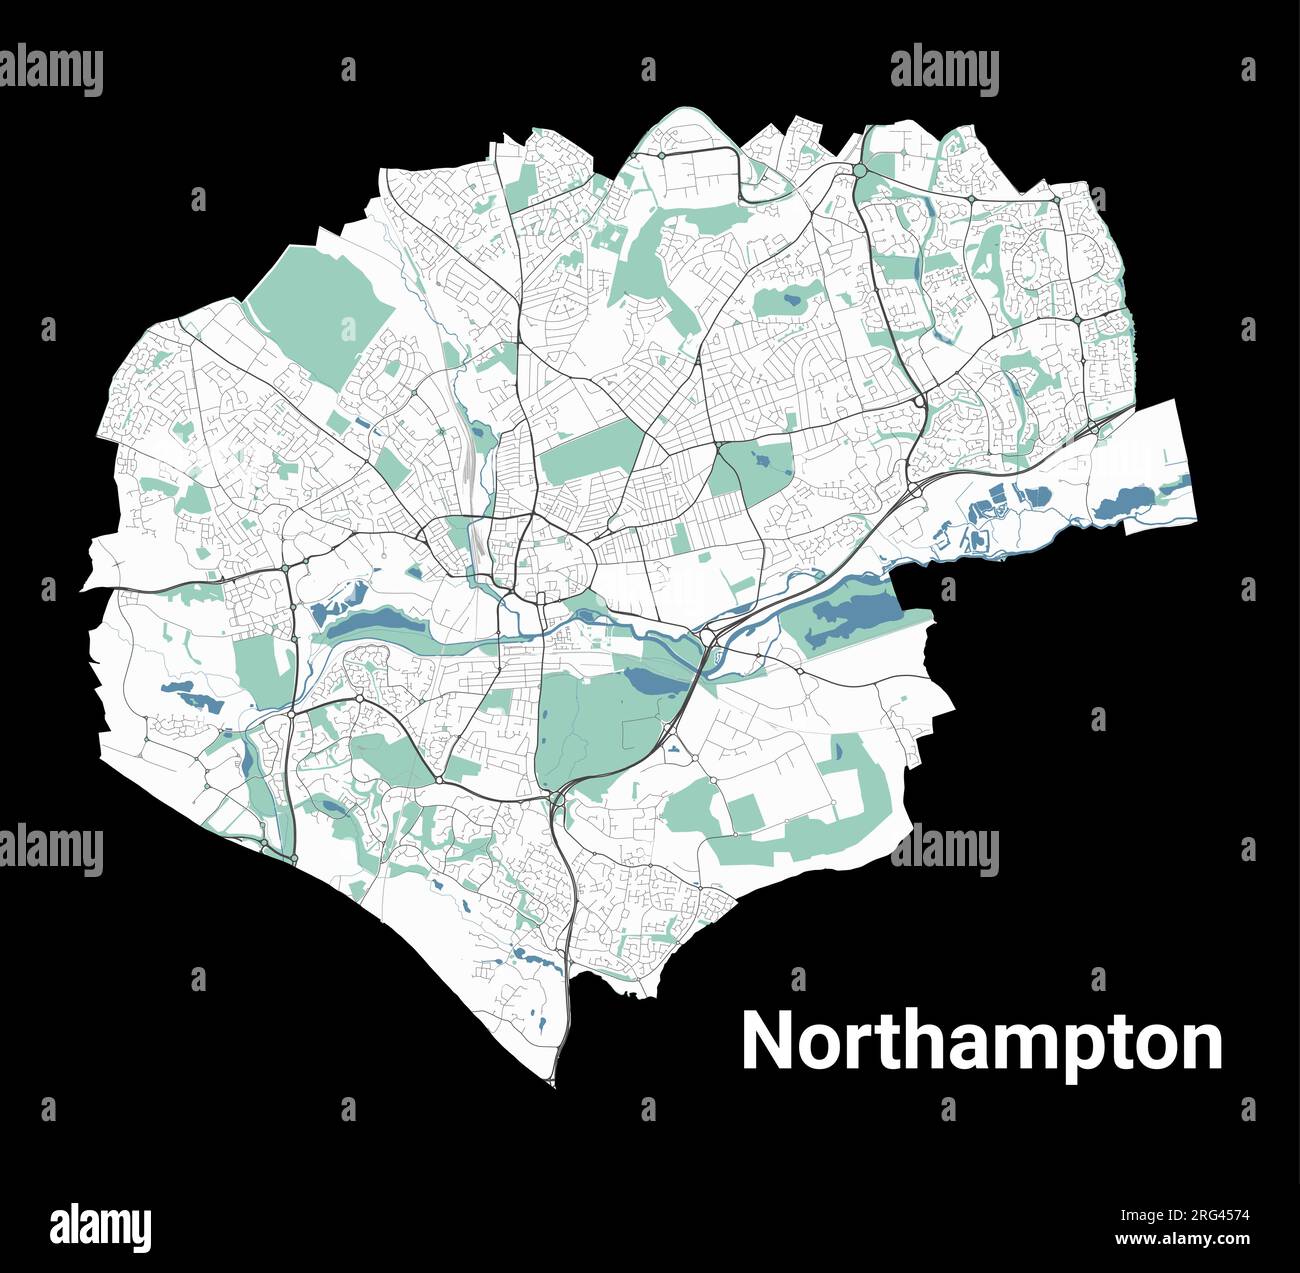 Northampton city map, detailed administrative area with border Stock Vector